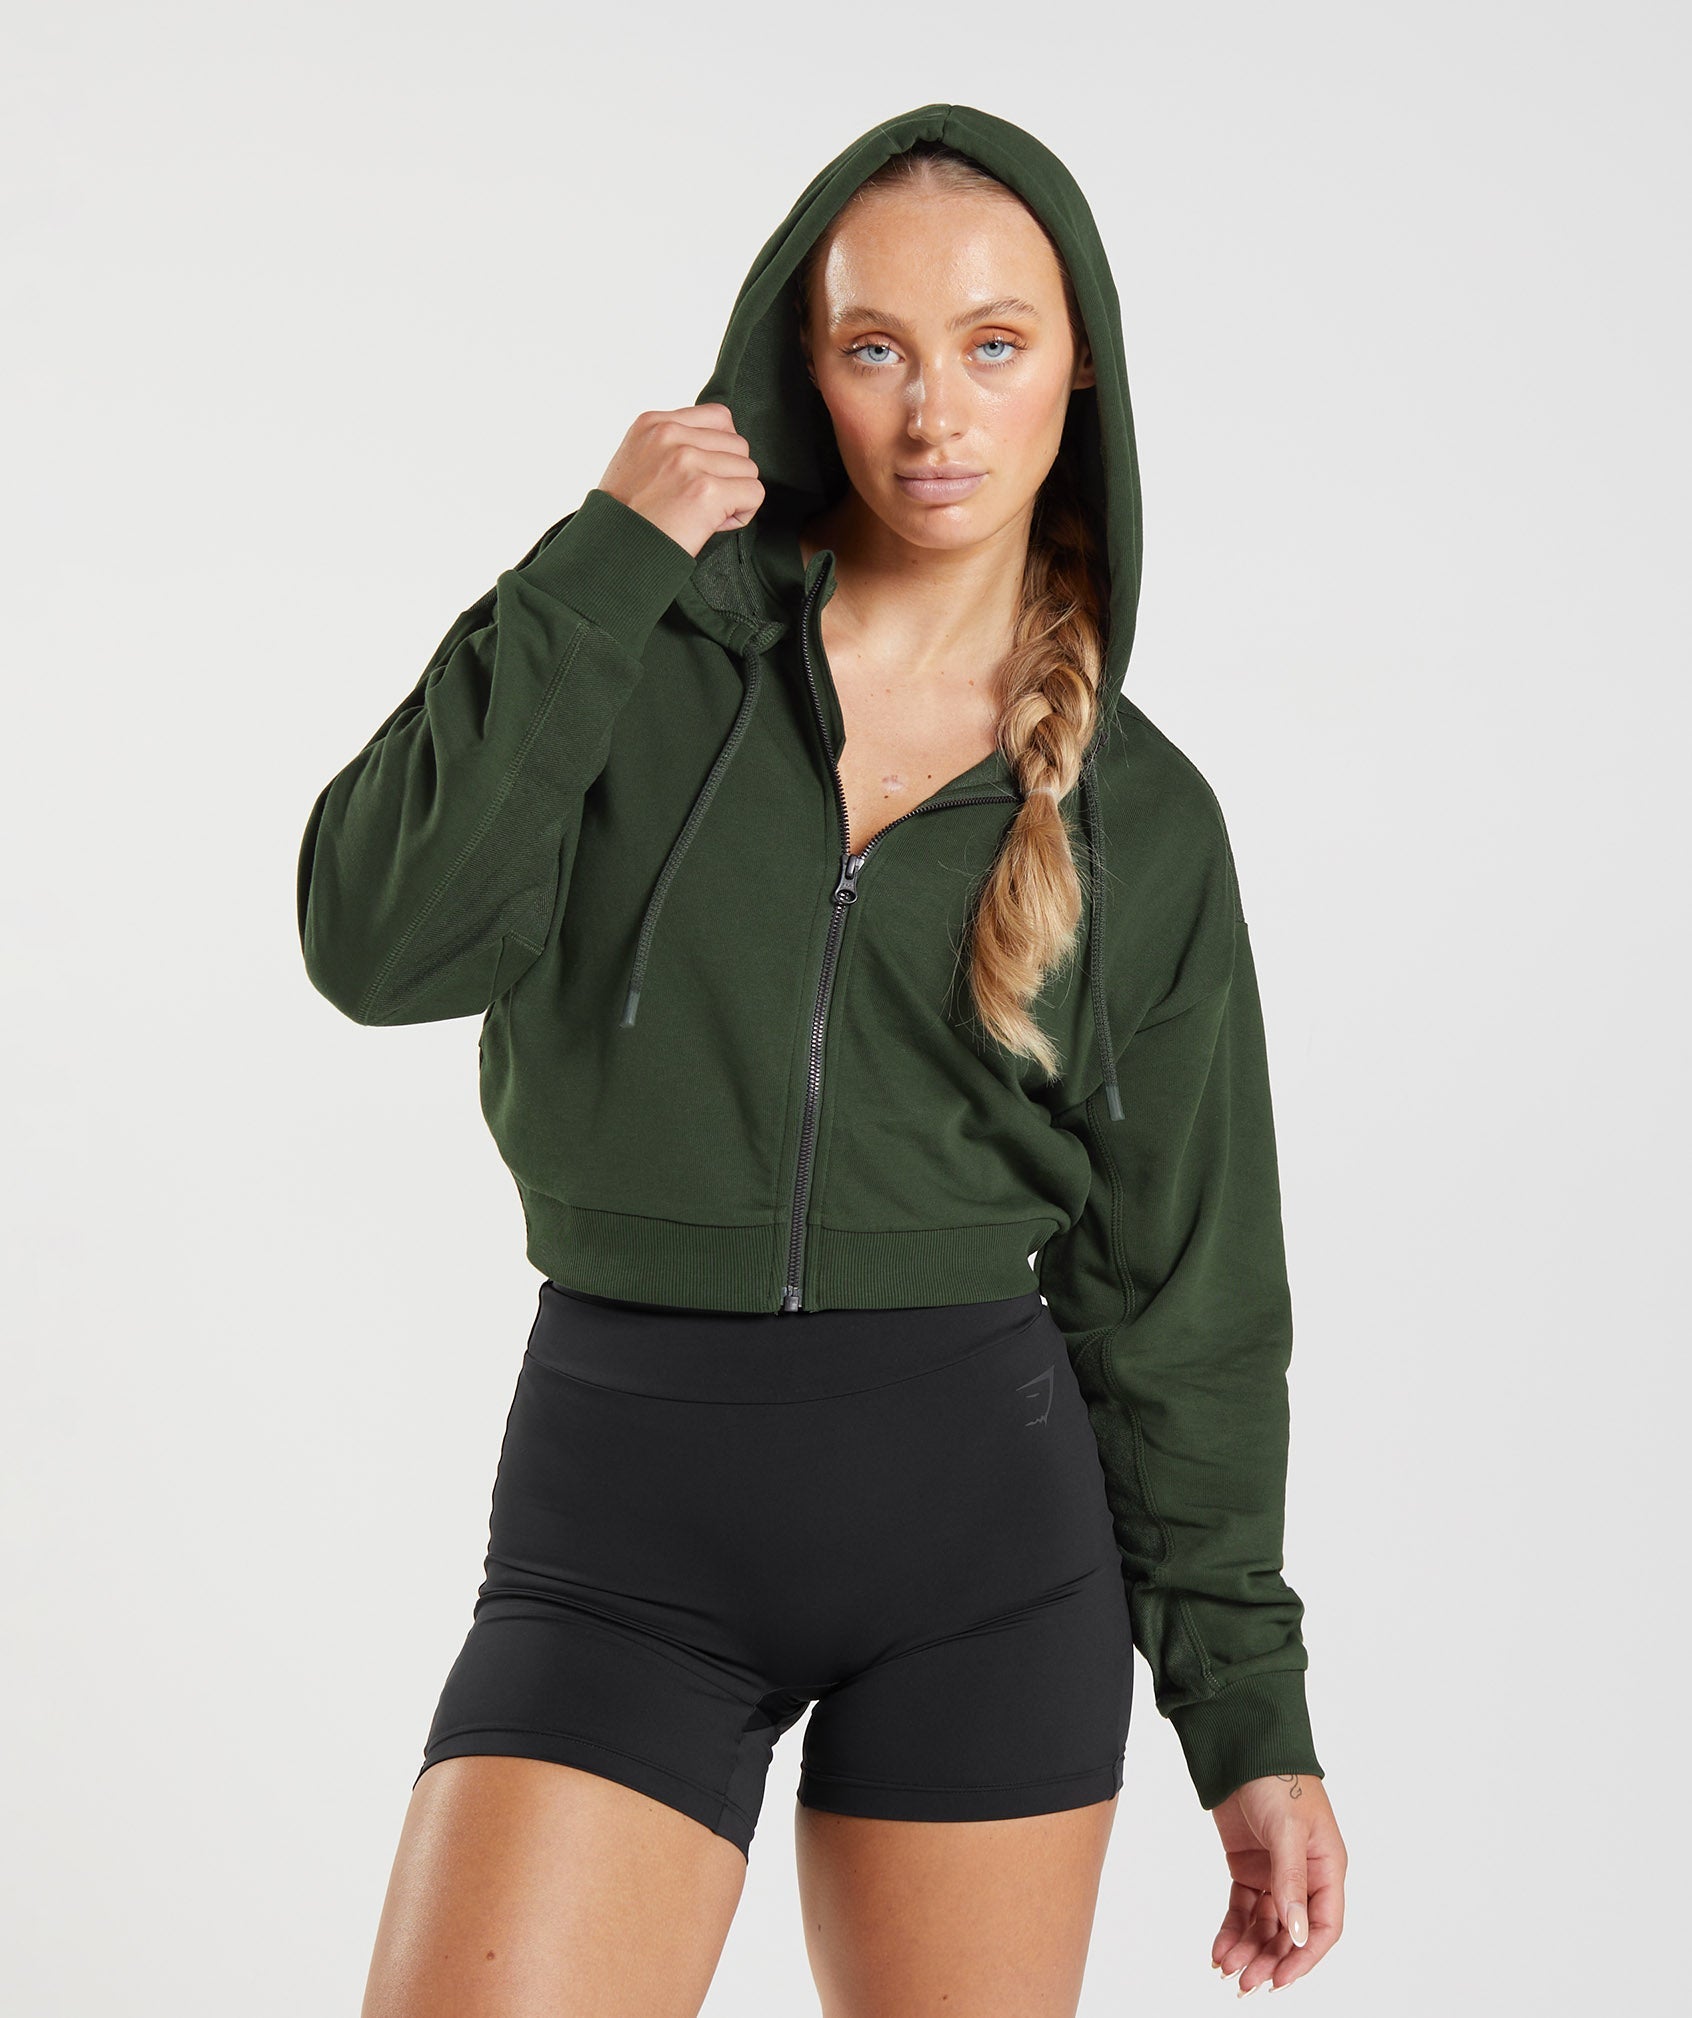 GS Power Cropped Zip Hoodie in Moss Olive - view 1